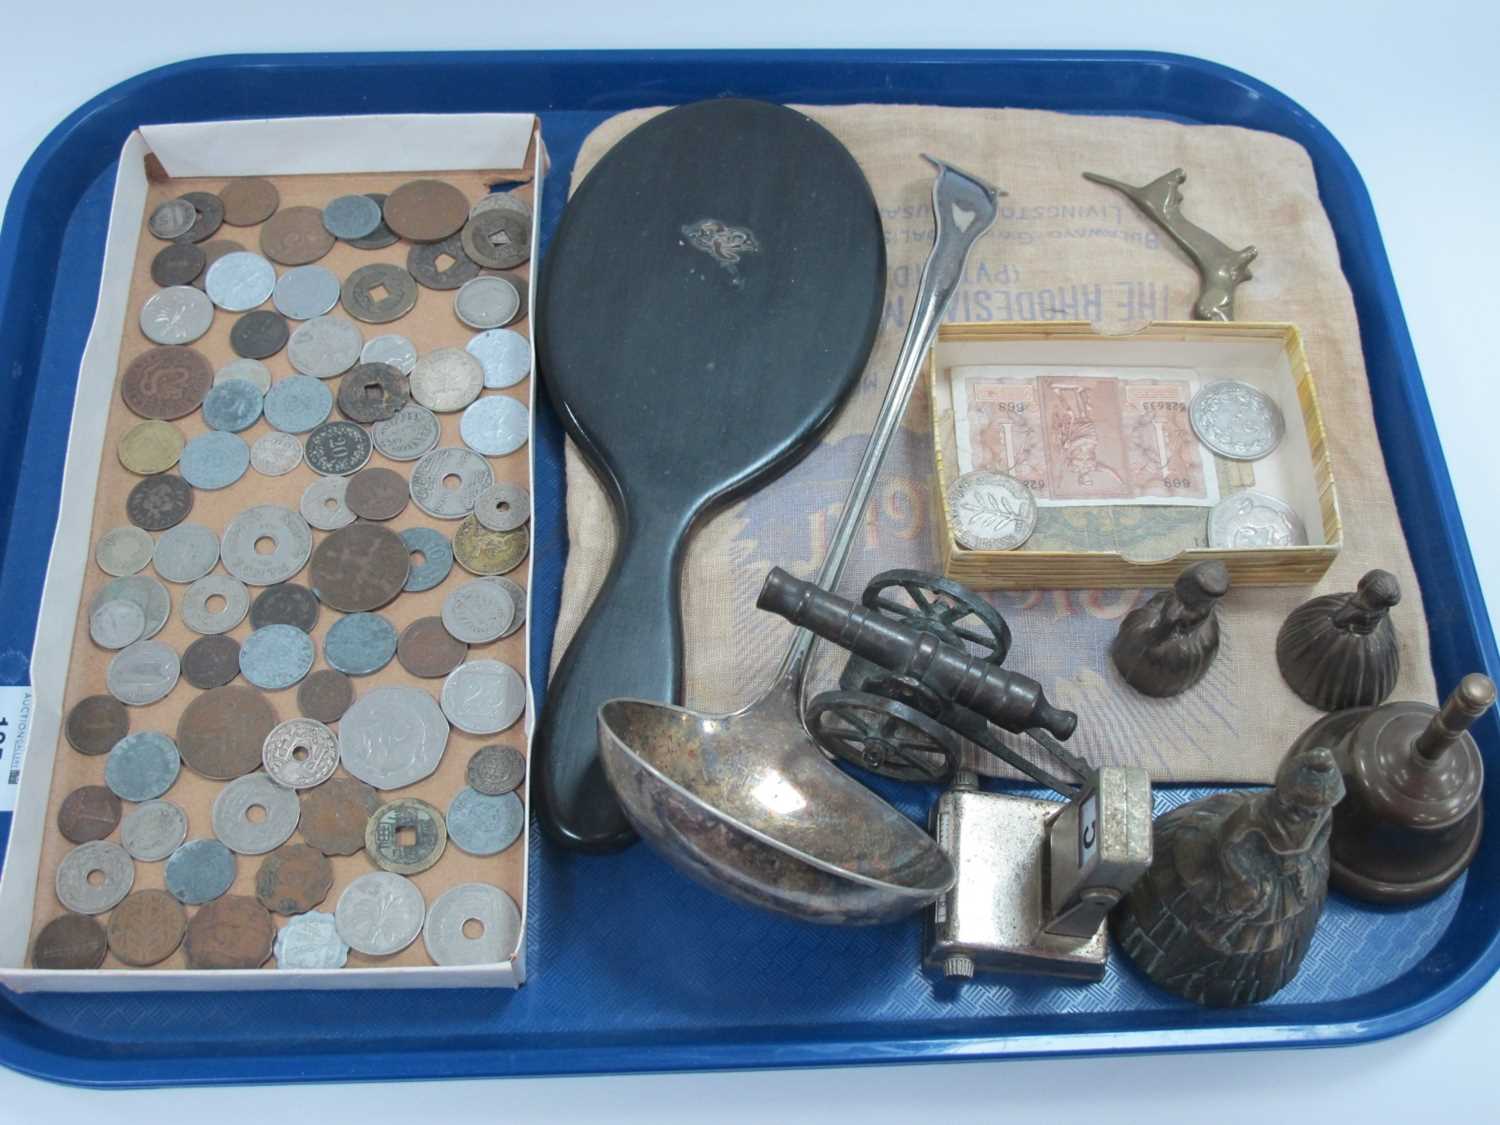 World Coinage, two banknotes, plated ladle, brass bells, cannon, sausage dog, calendar, etc.